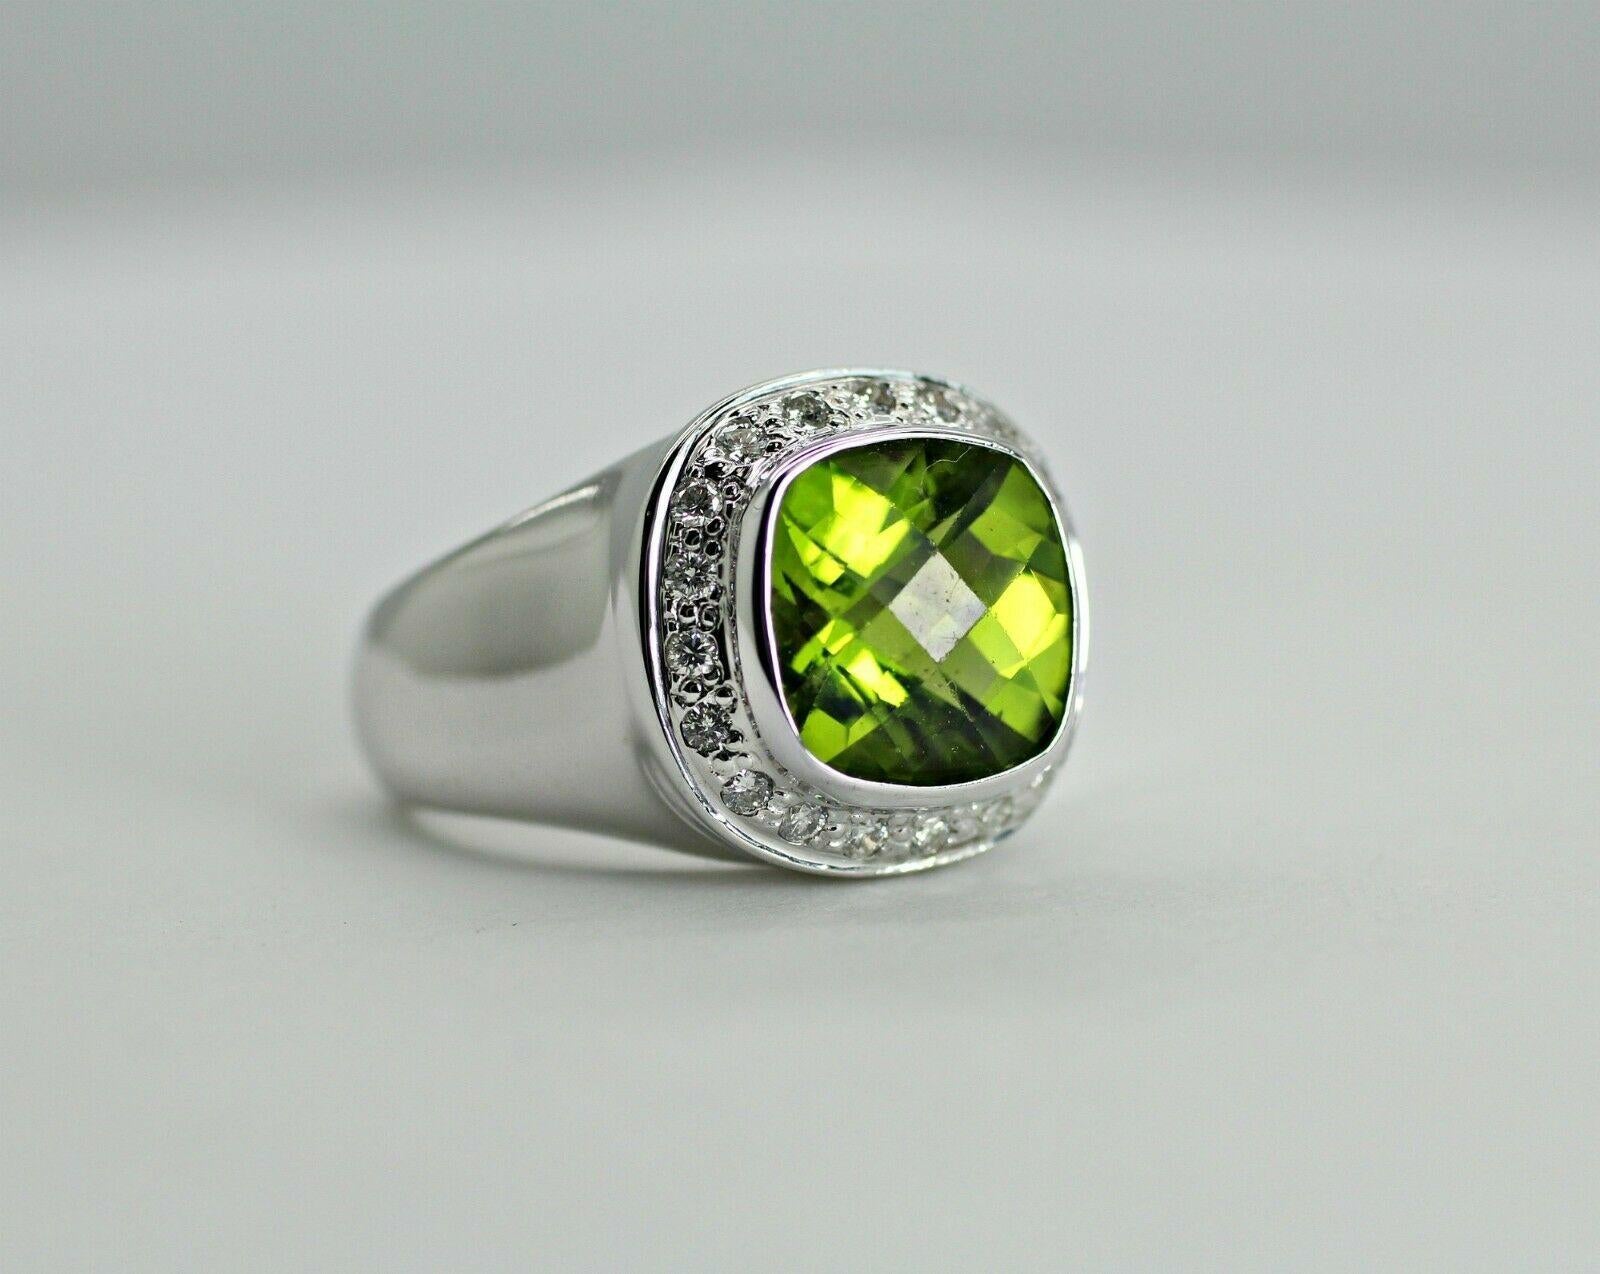  14k white gold peridot and diamond wide ring, containing 
Specifications:
    main stone: peridot ~1.80ct
    additional: diamonds
    diamonds: 20 pcs
    carat total weight: 0.24
    color: G
    clarity: vs2-SI1
    brand: UNBRANDED
    metal: